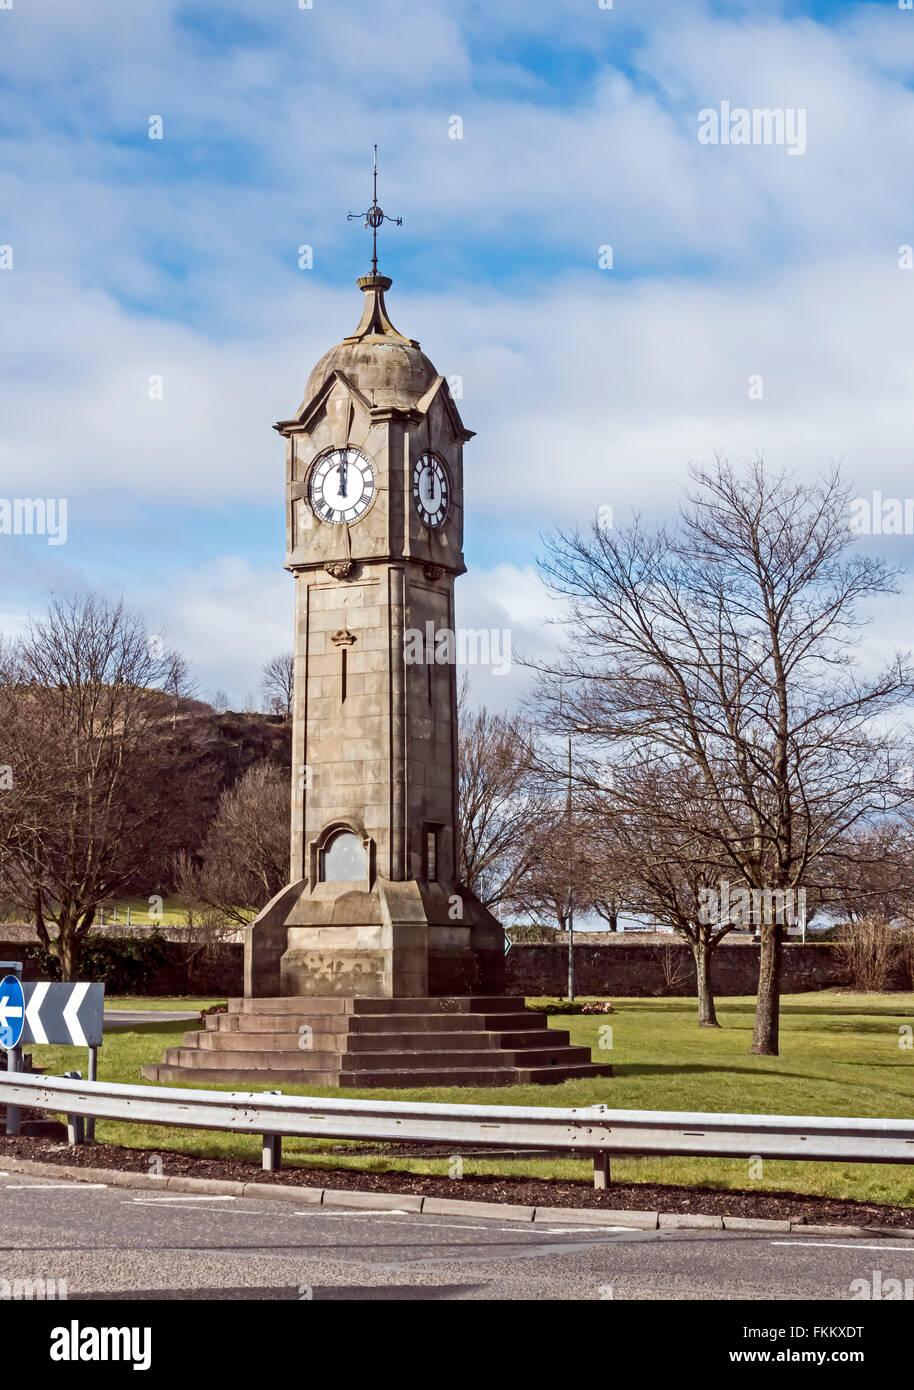 The Bridge Clock at the Customs Roundabout Between Union Street and River Forth in Stirling Scotland Stock Photo